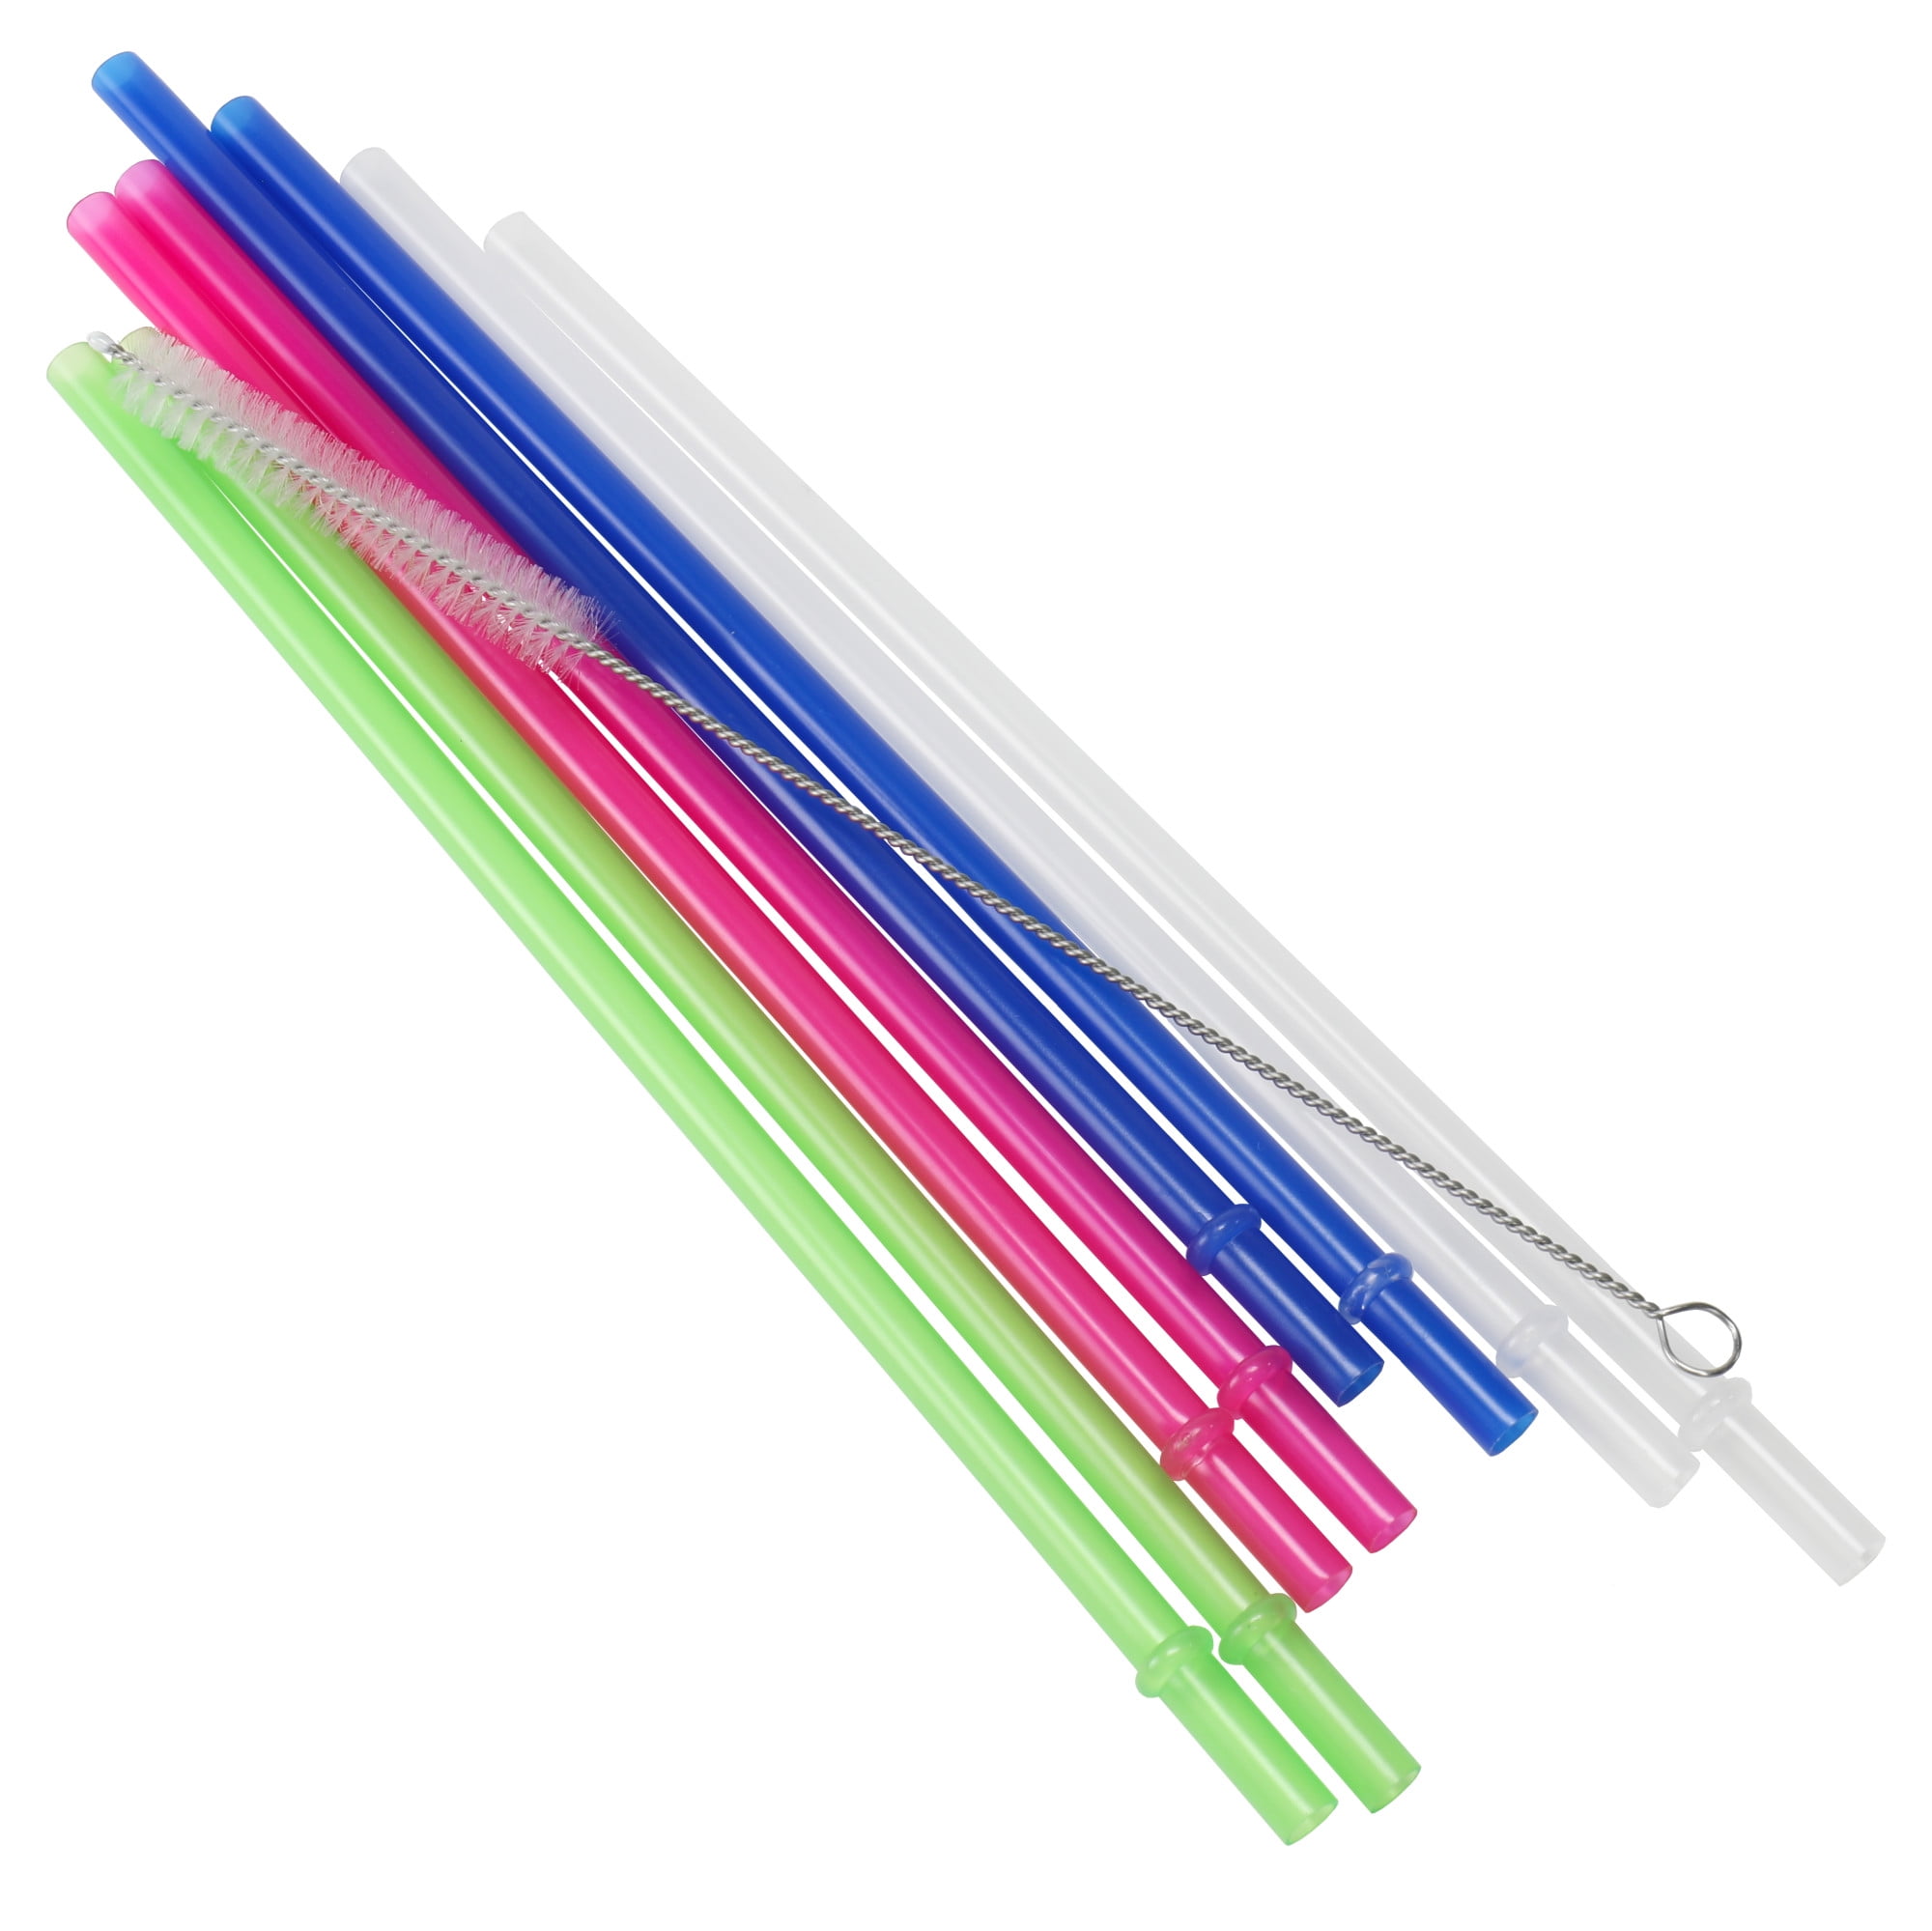  60 Pieces Christmas Straws Plastic Reusable Straw with